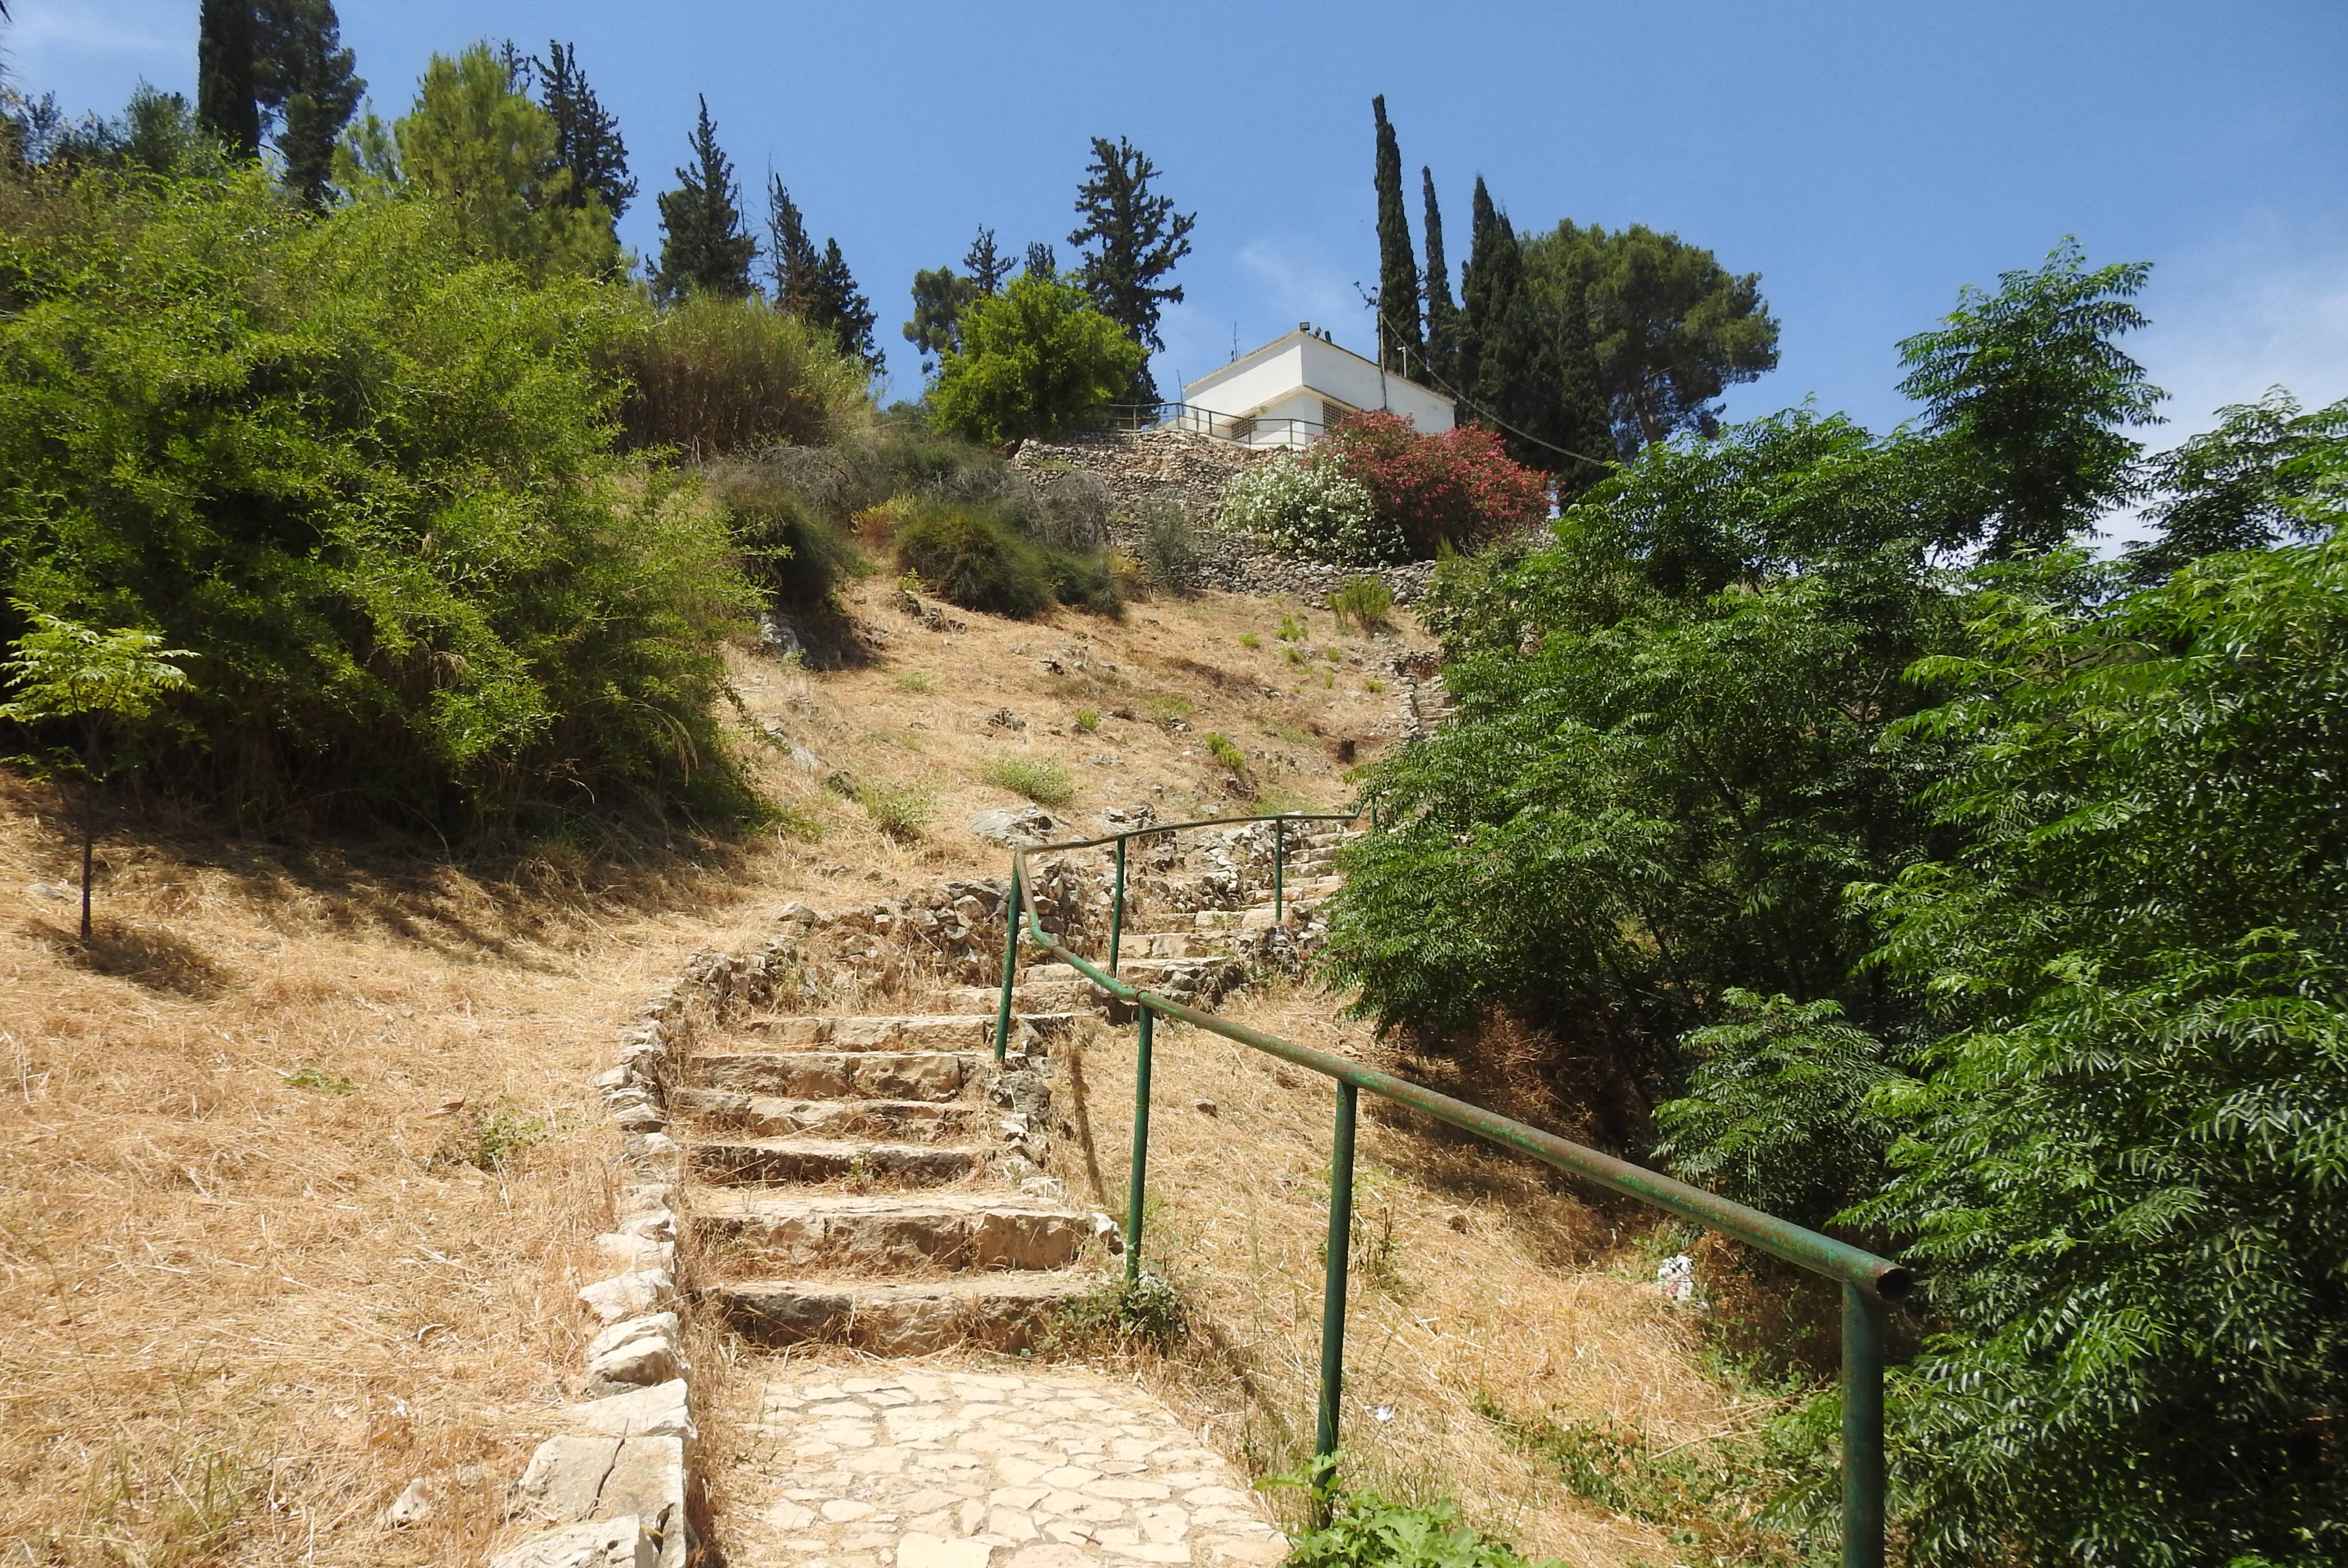 The path up to the Hankin house and tomb